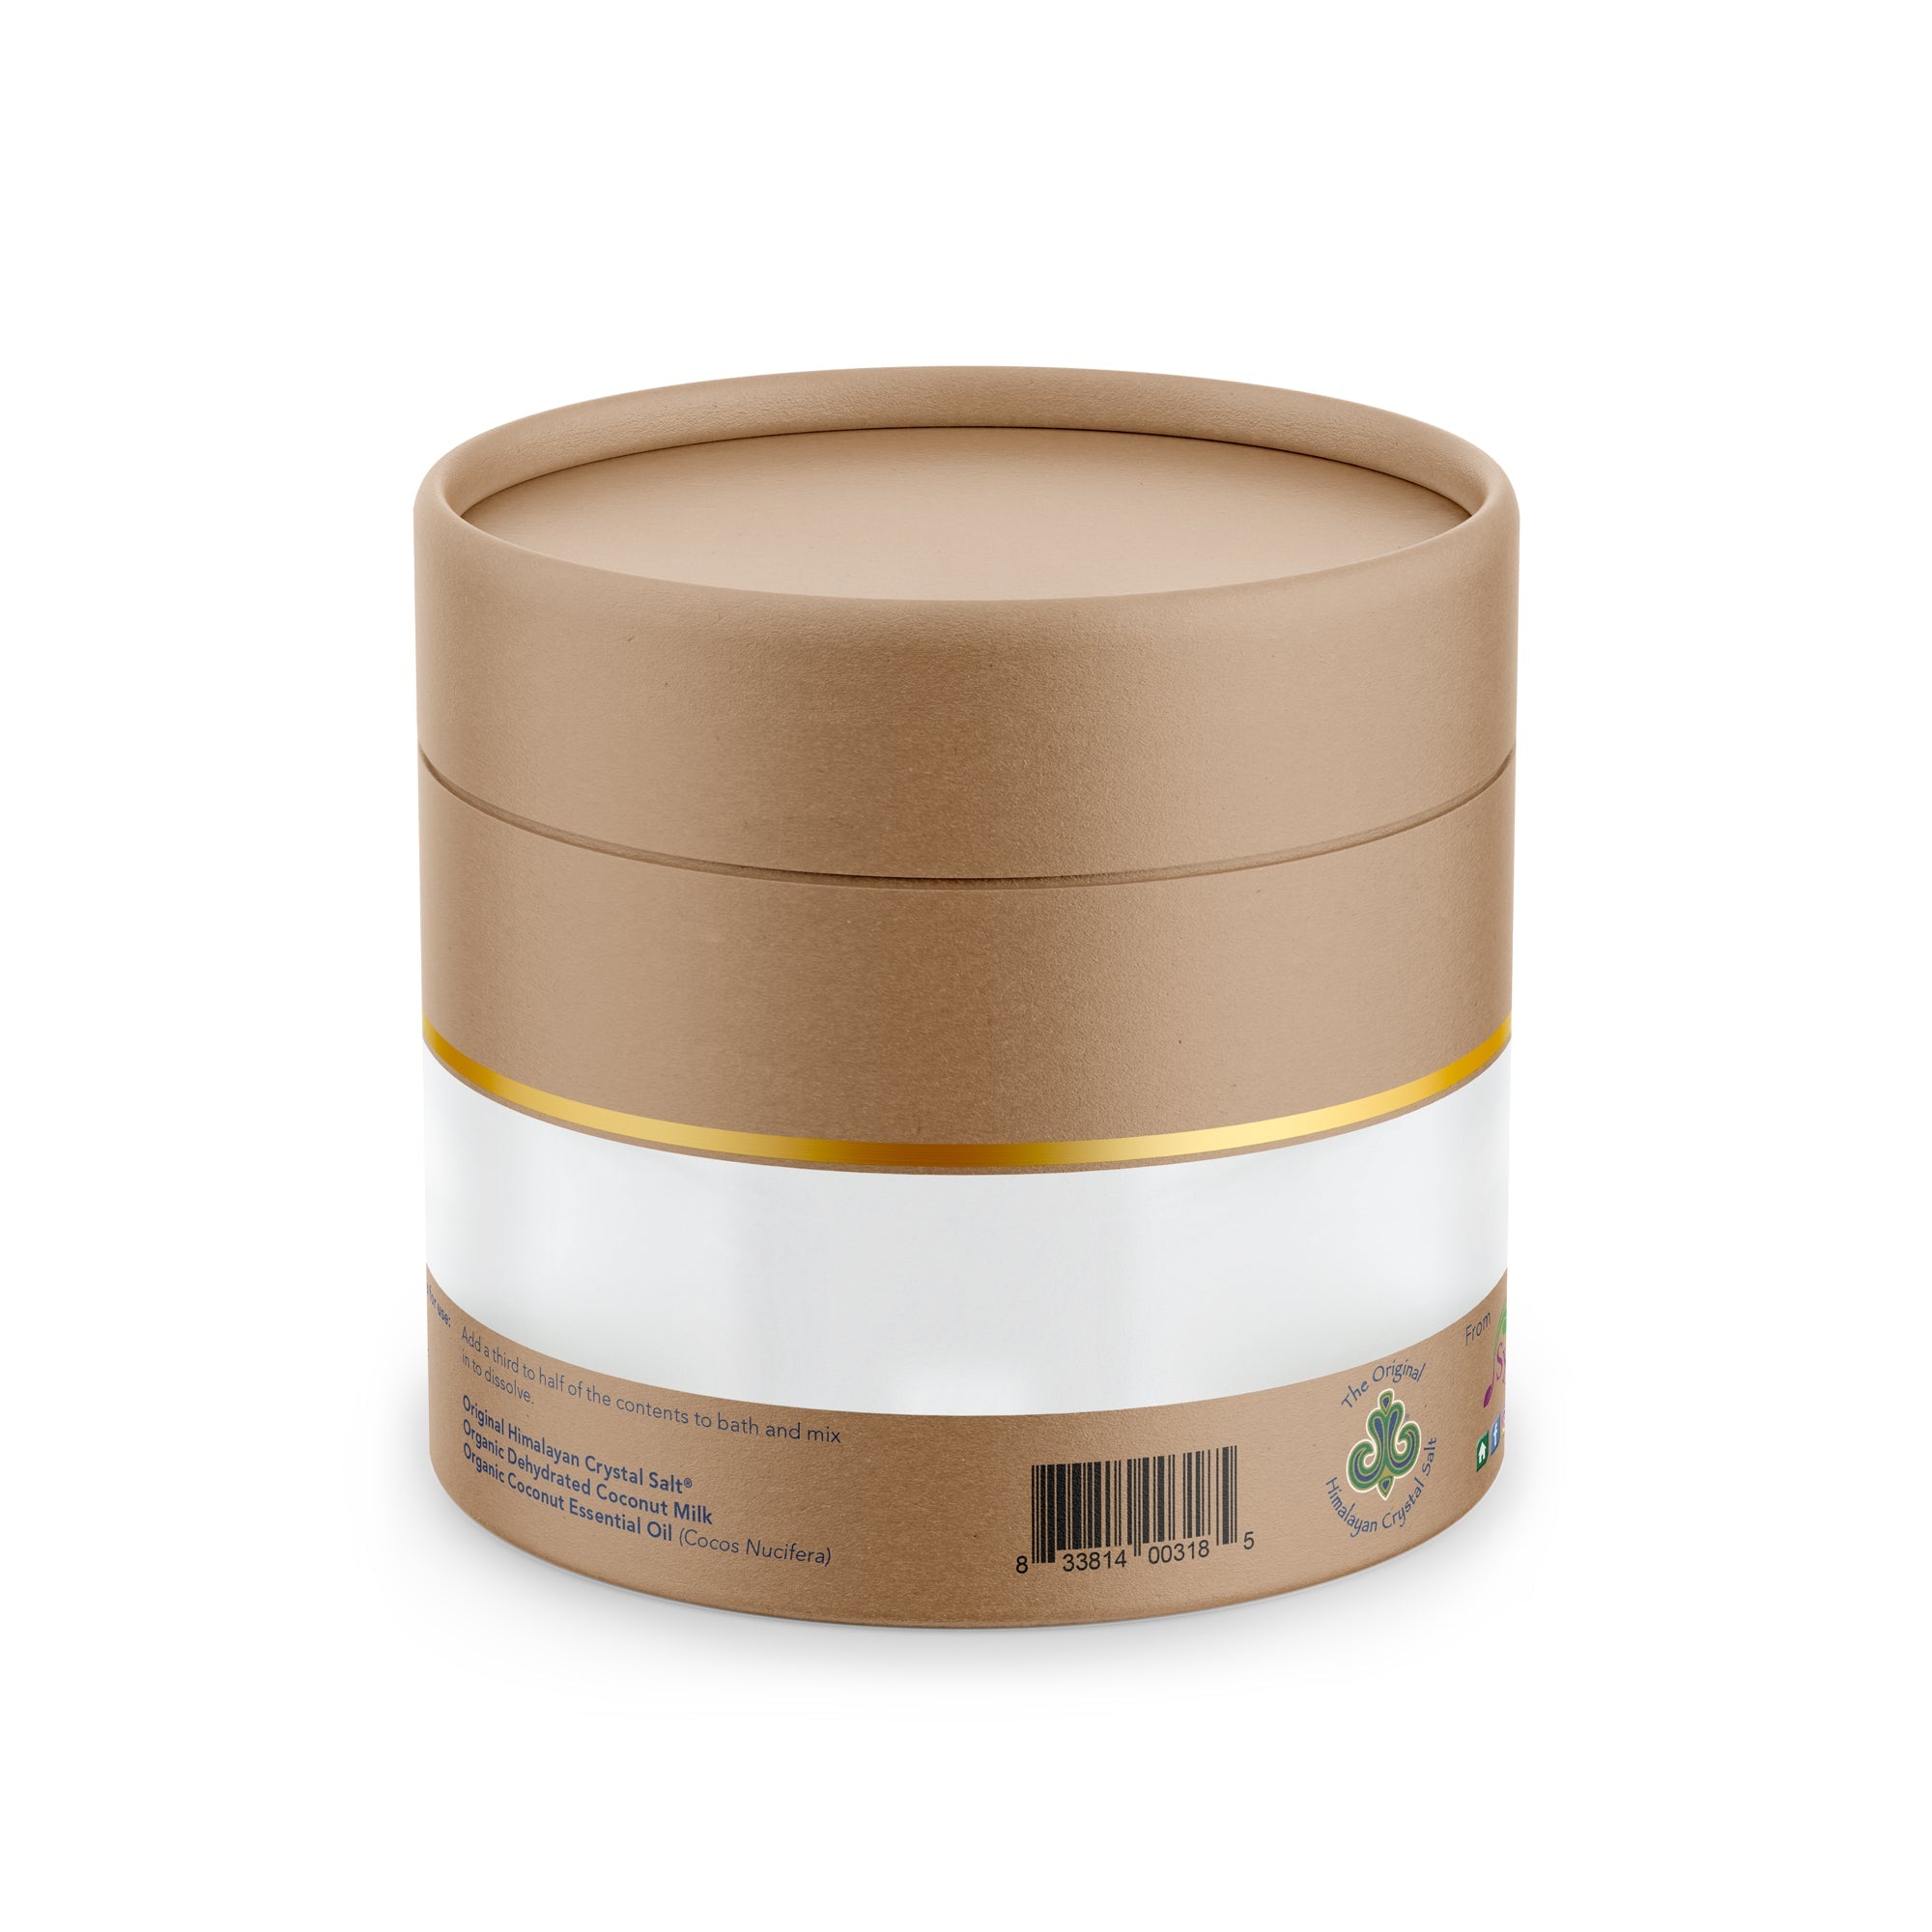 Coconut Soak back of tan cylindrical box featuring gold and white bands, Himalayan Crystal Salt logo on white background